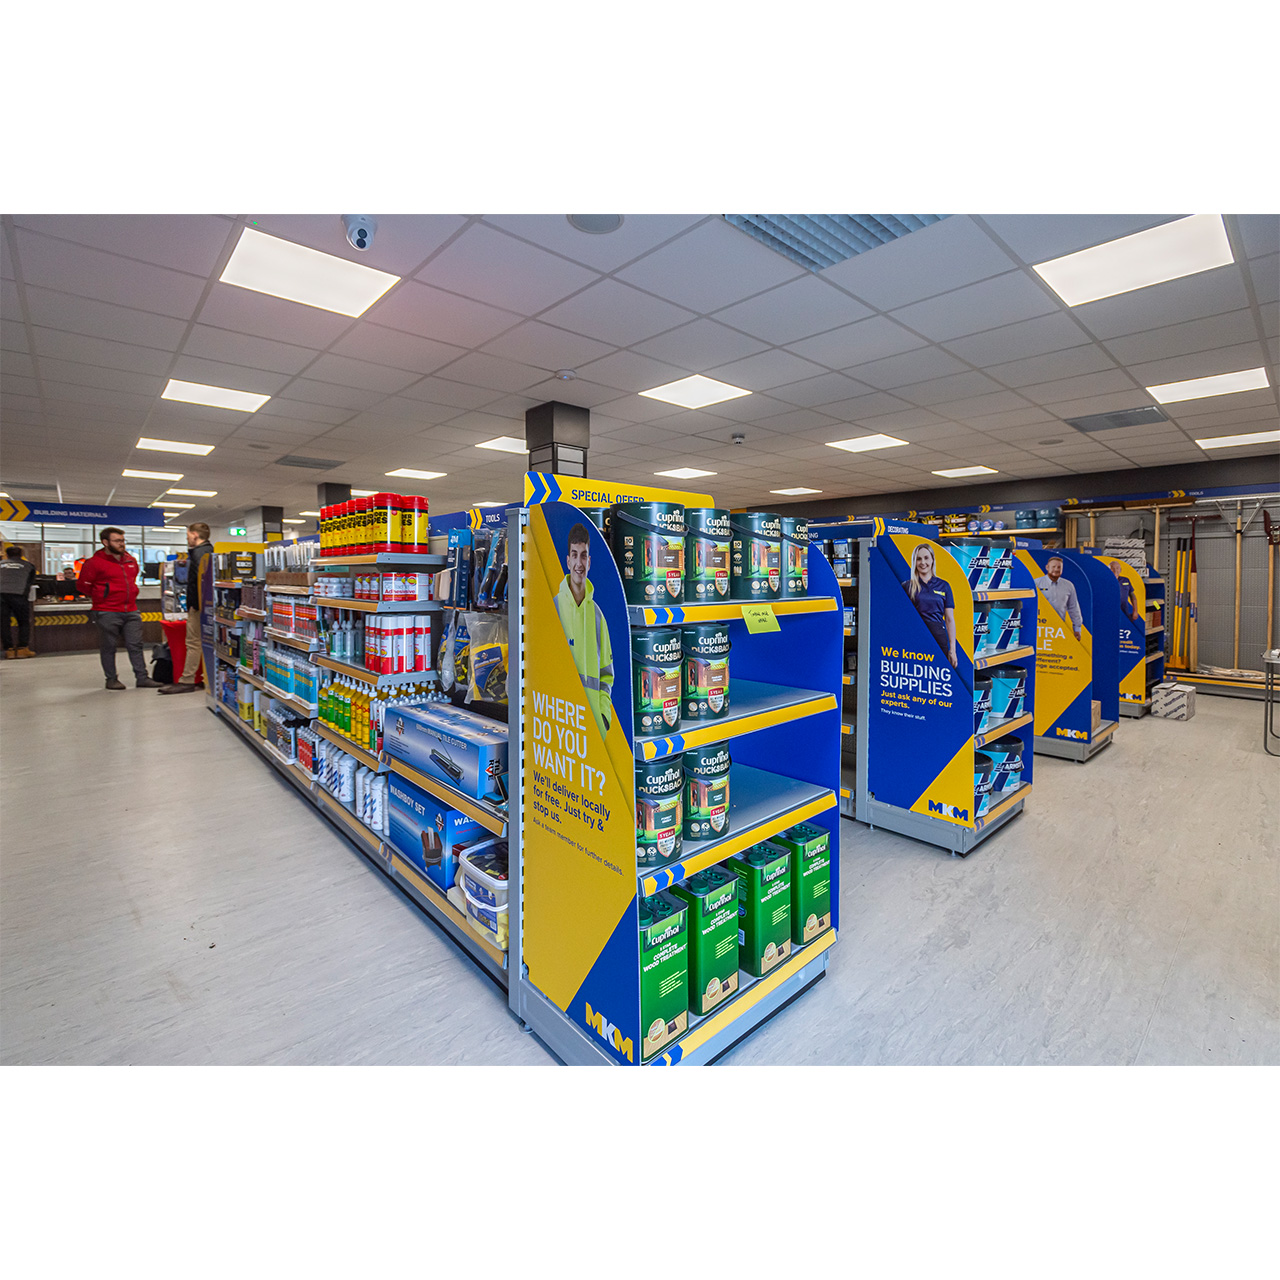 Images MKM Building Supplies Sleaford